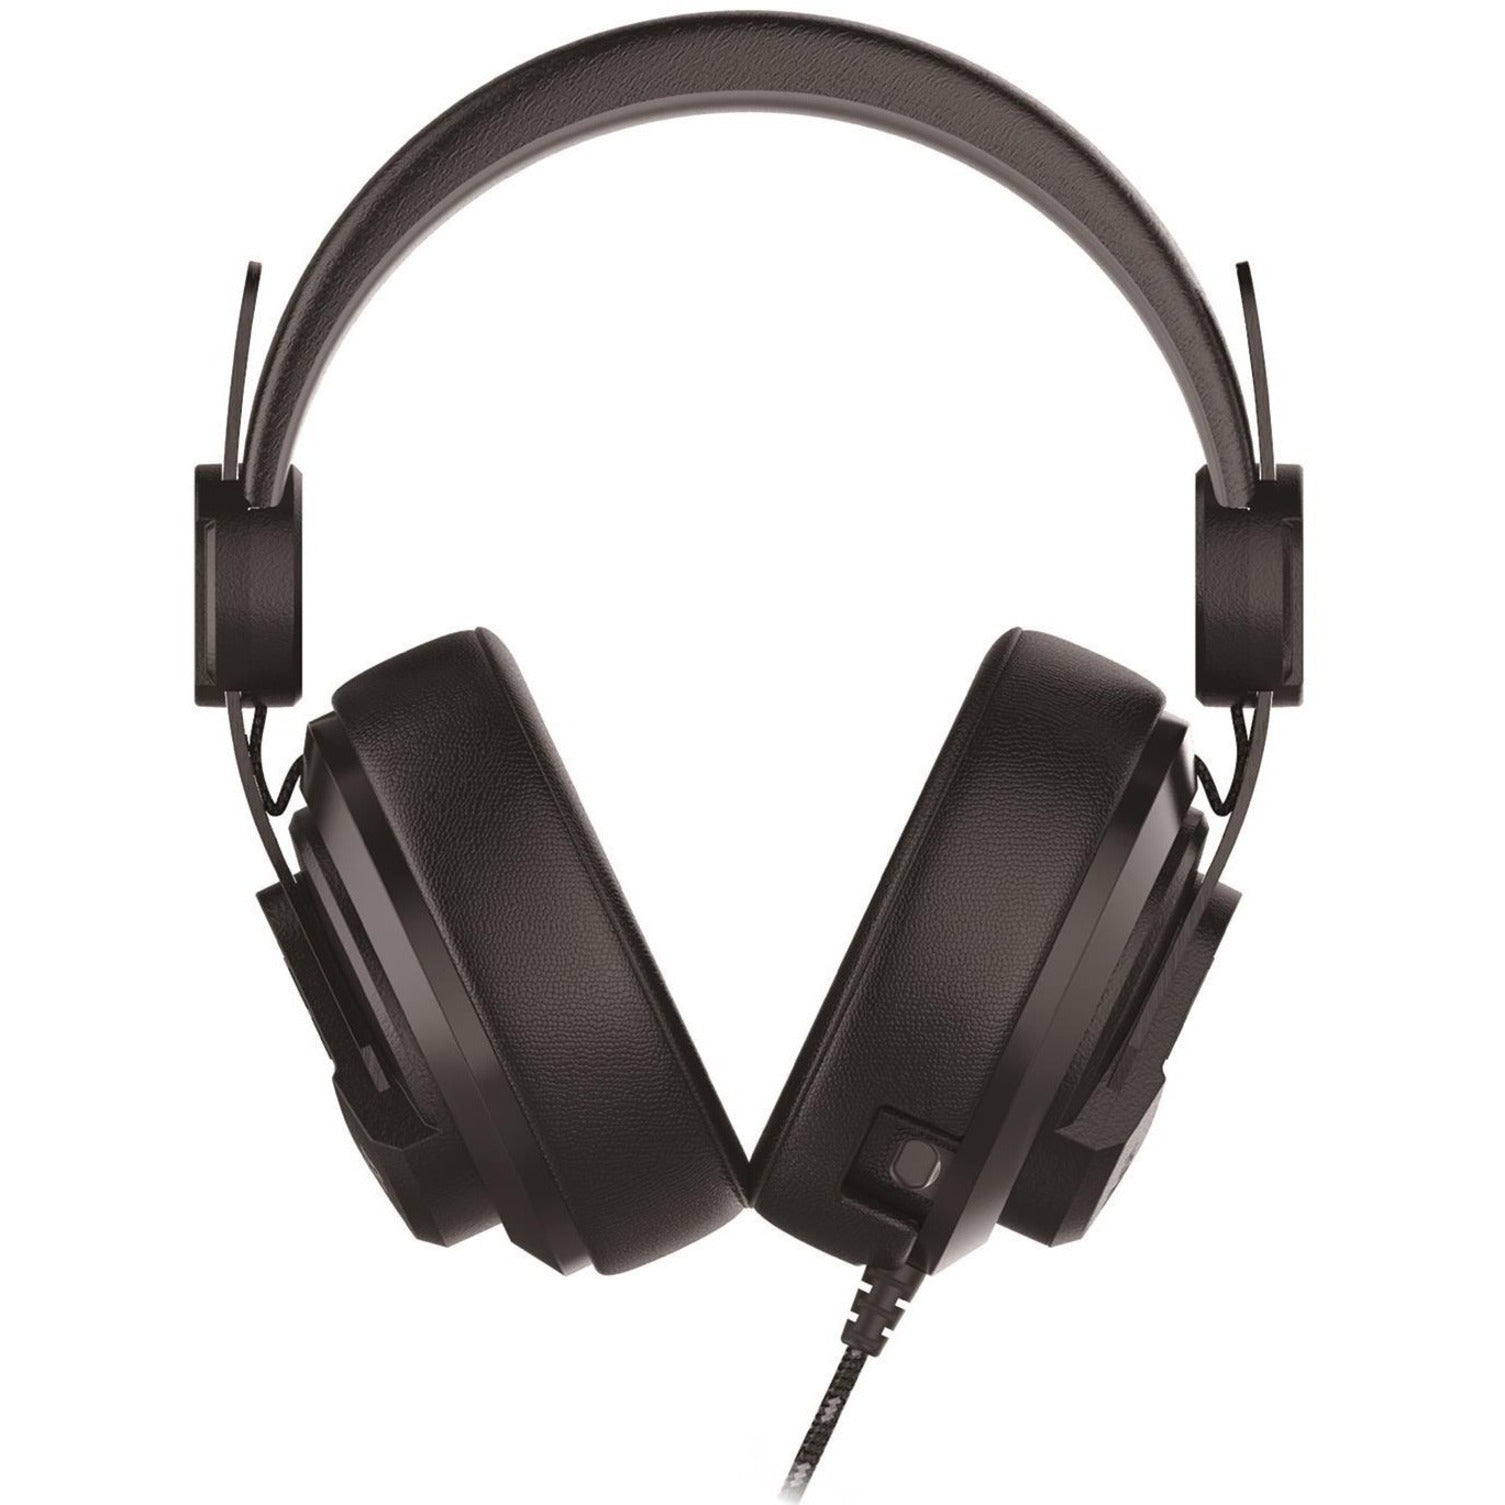 Plugable TRRS-HS53 Performance Onyx Gaming Headset with Retractable Microphone, Binaural Over-the-head, 3.5mm Wired